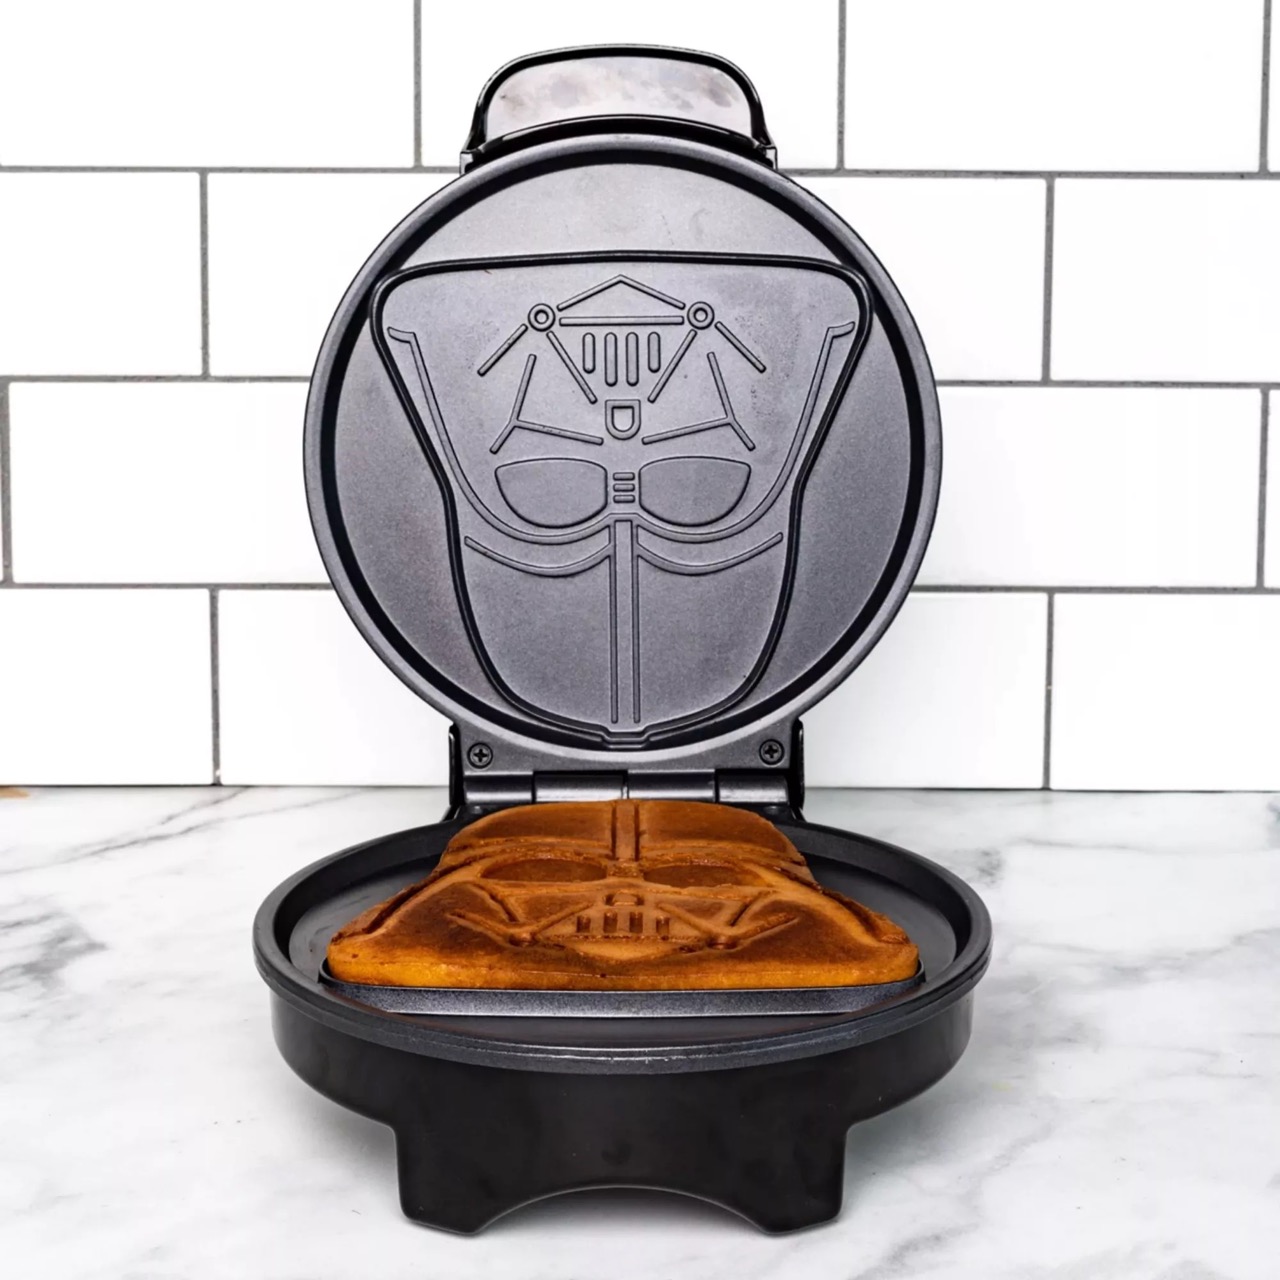 https://storables.com/wp-content/uploads/2023/08/10-incredible-darth-vader-waffle-iron-for-2023-1692277988.jpeg